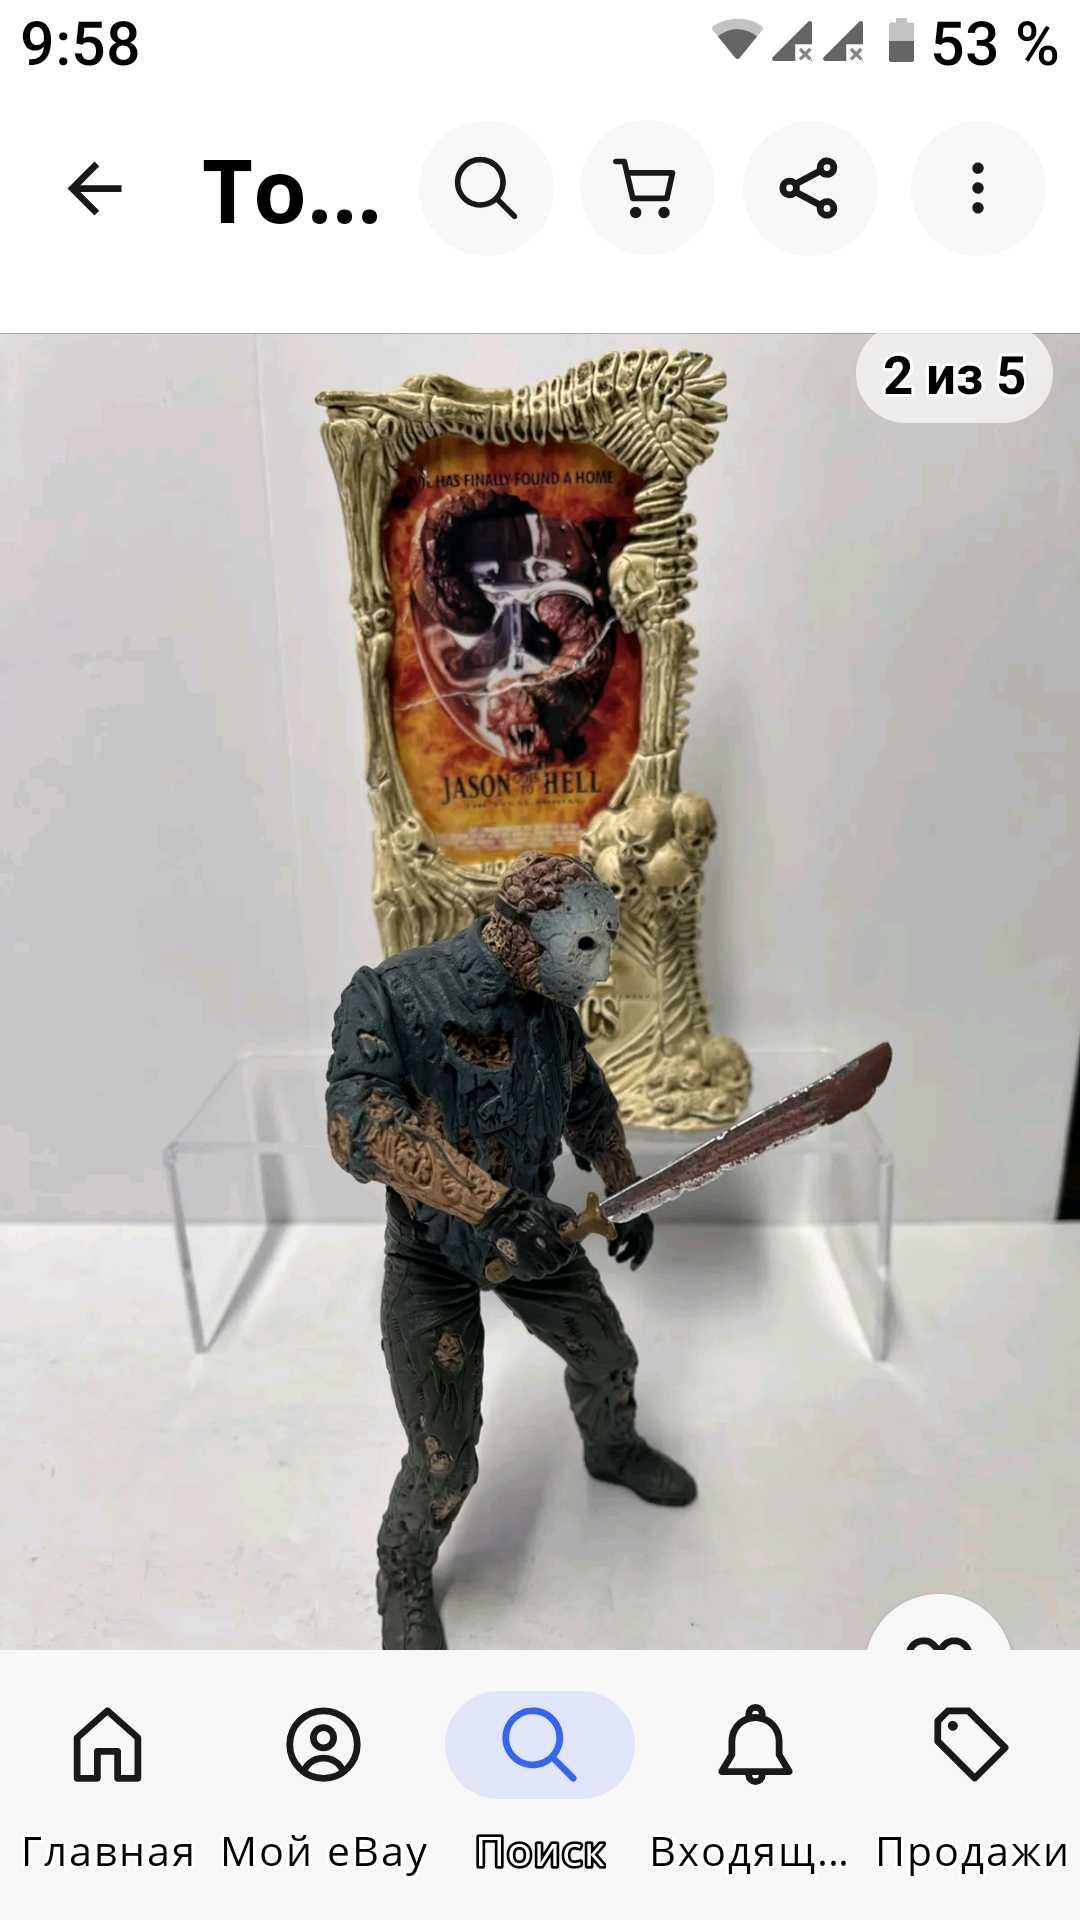 McFarlane Toys Jason Voorhees Friday the 13th Movie Maniacs